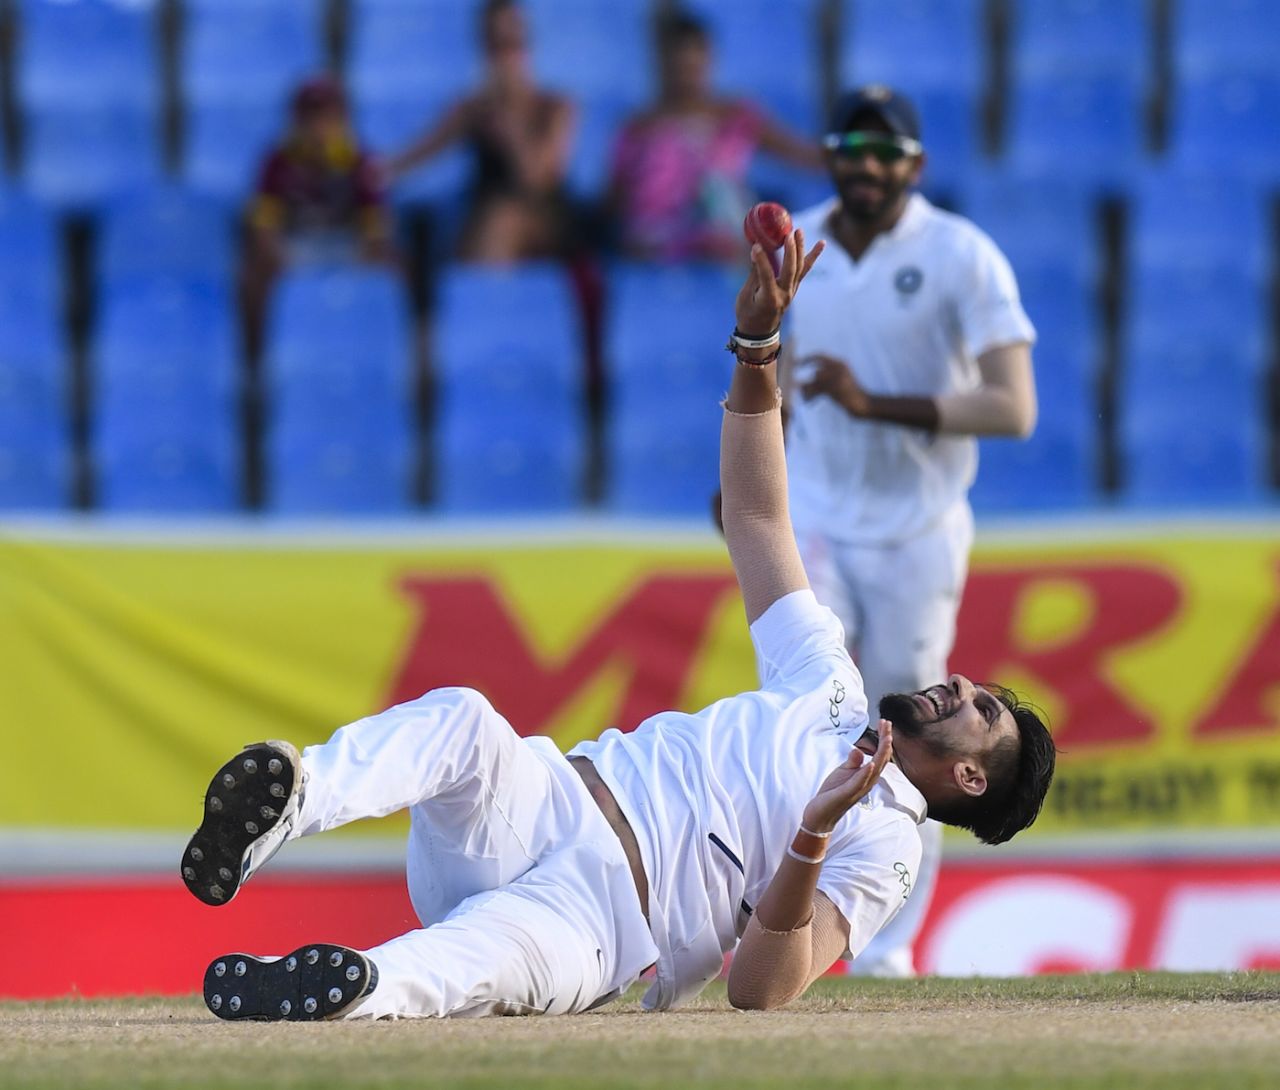 Ishant Sharma is thrilled after taking a return catch, West Indies v India, 1st Test, North Sound, 2nd day, August 23, 2019